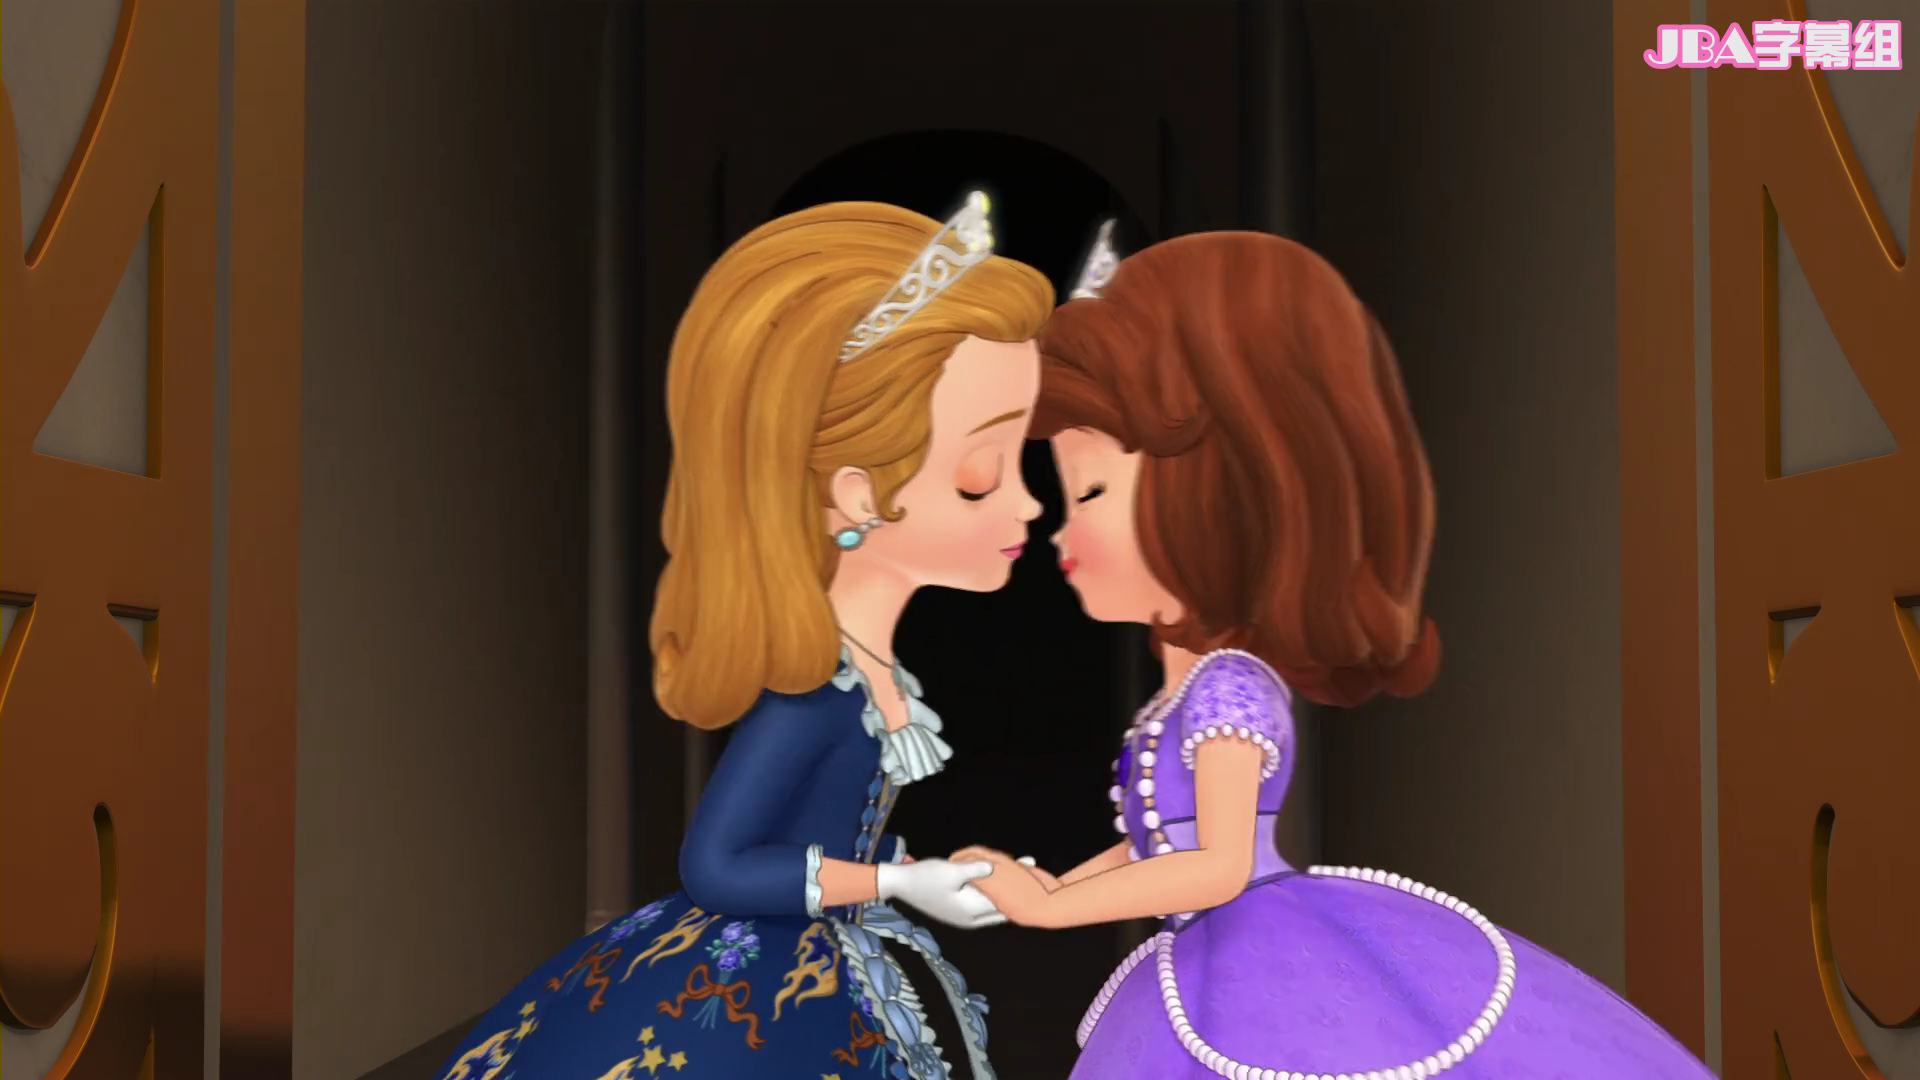 Sofia The First Images on Fanpop.